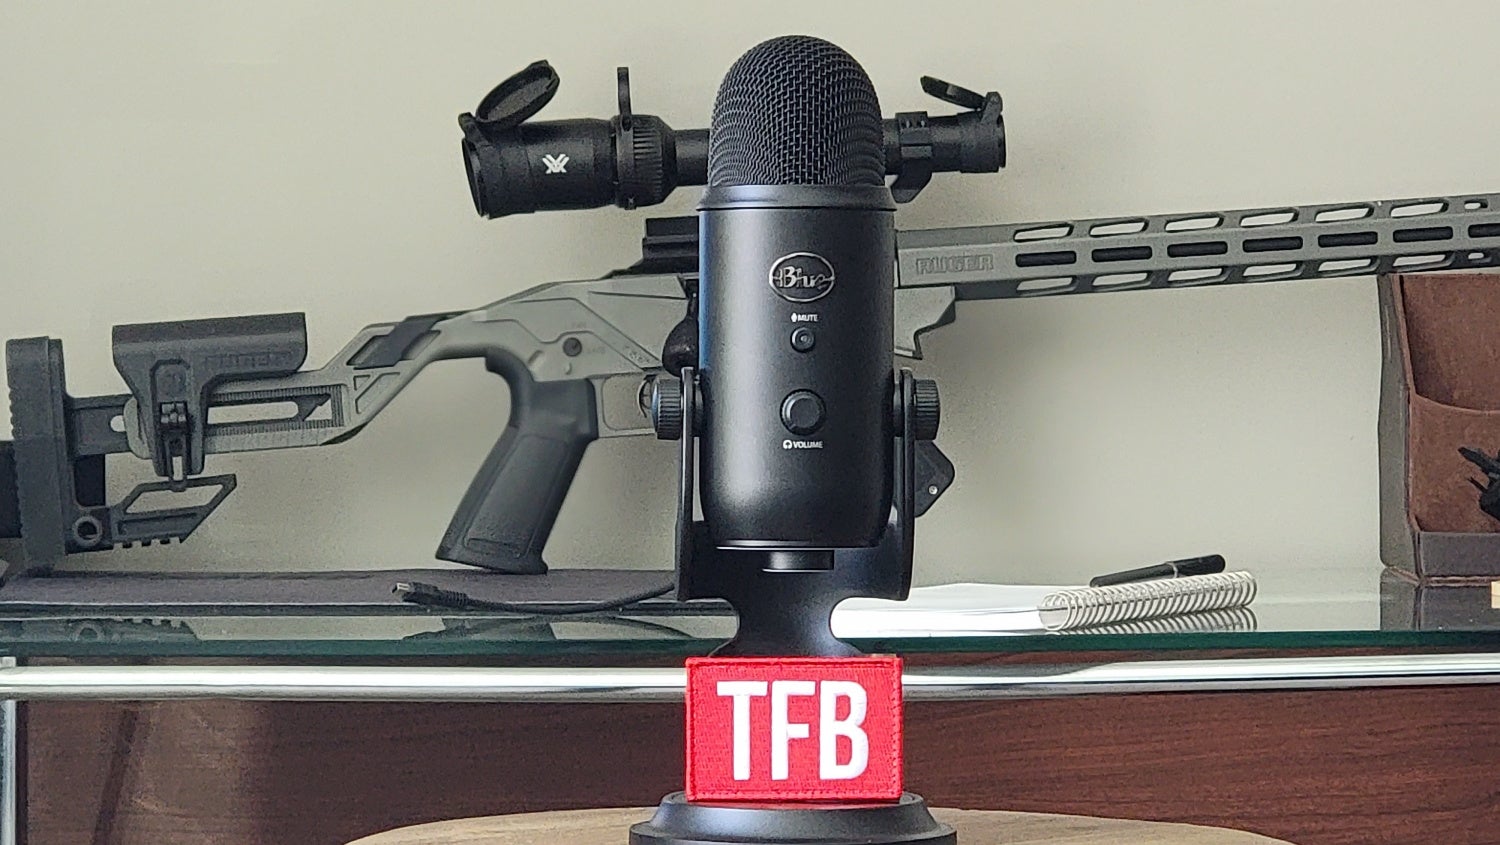 TFB Podcast Roundup 38: Practicality and Gunfighting